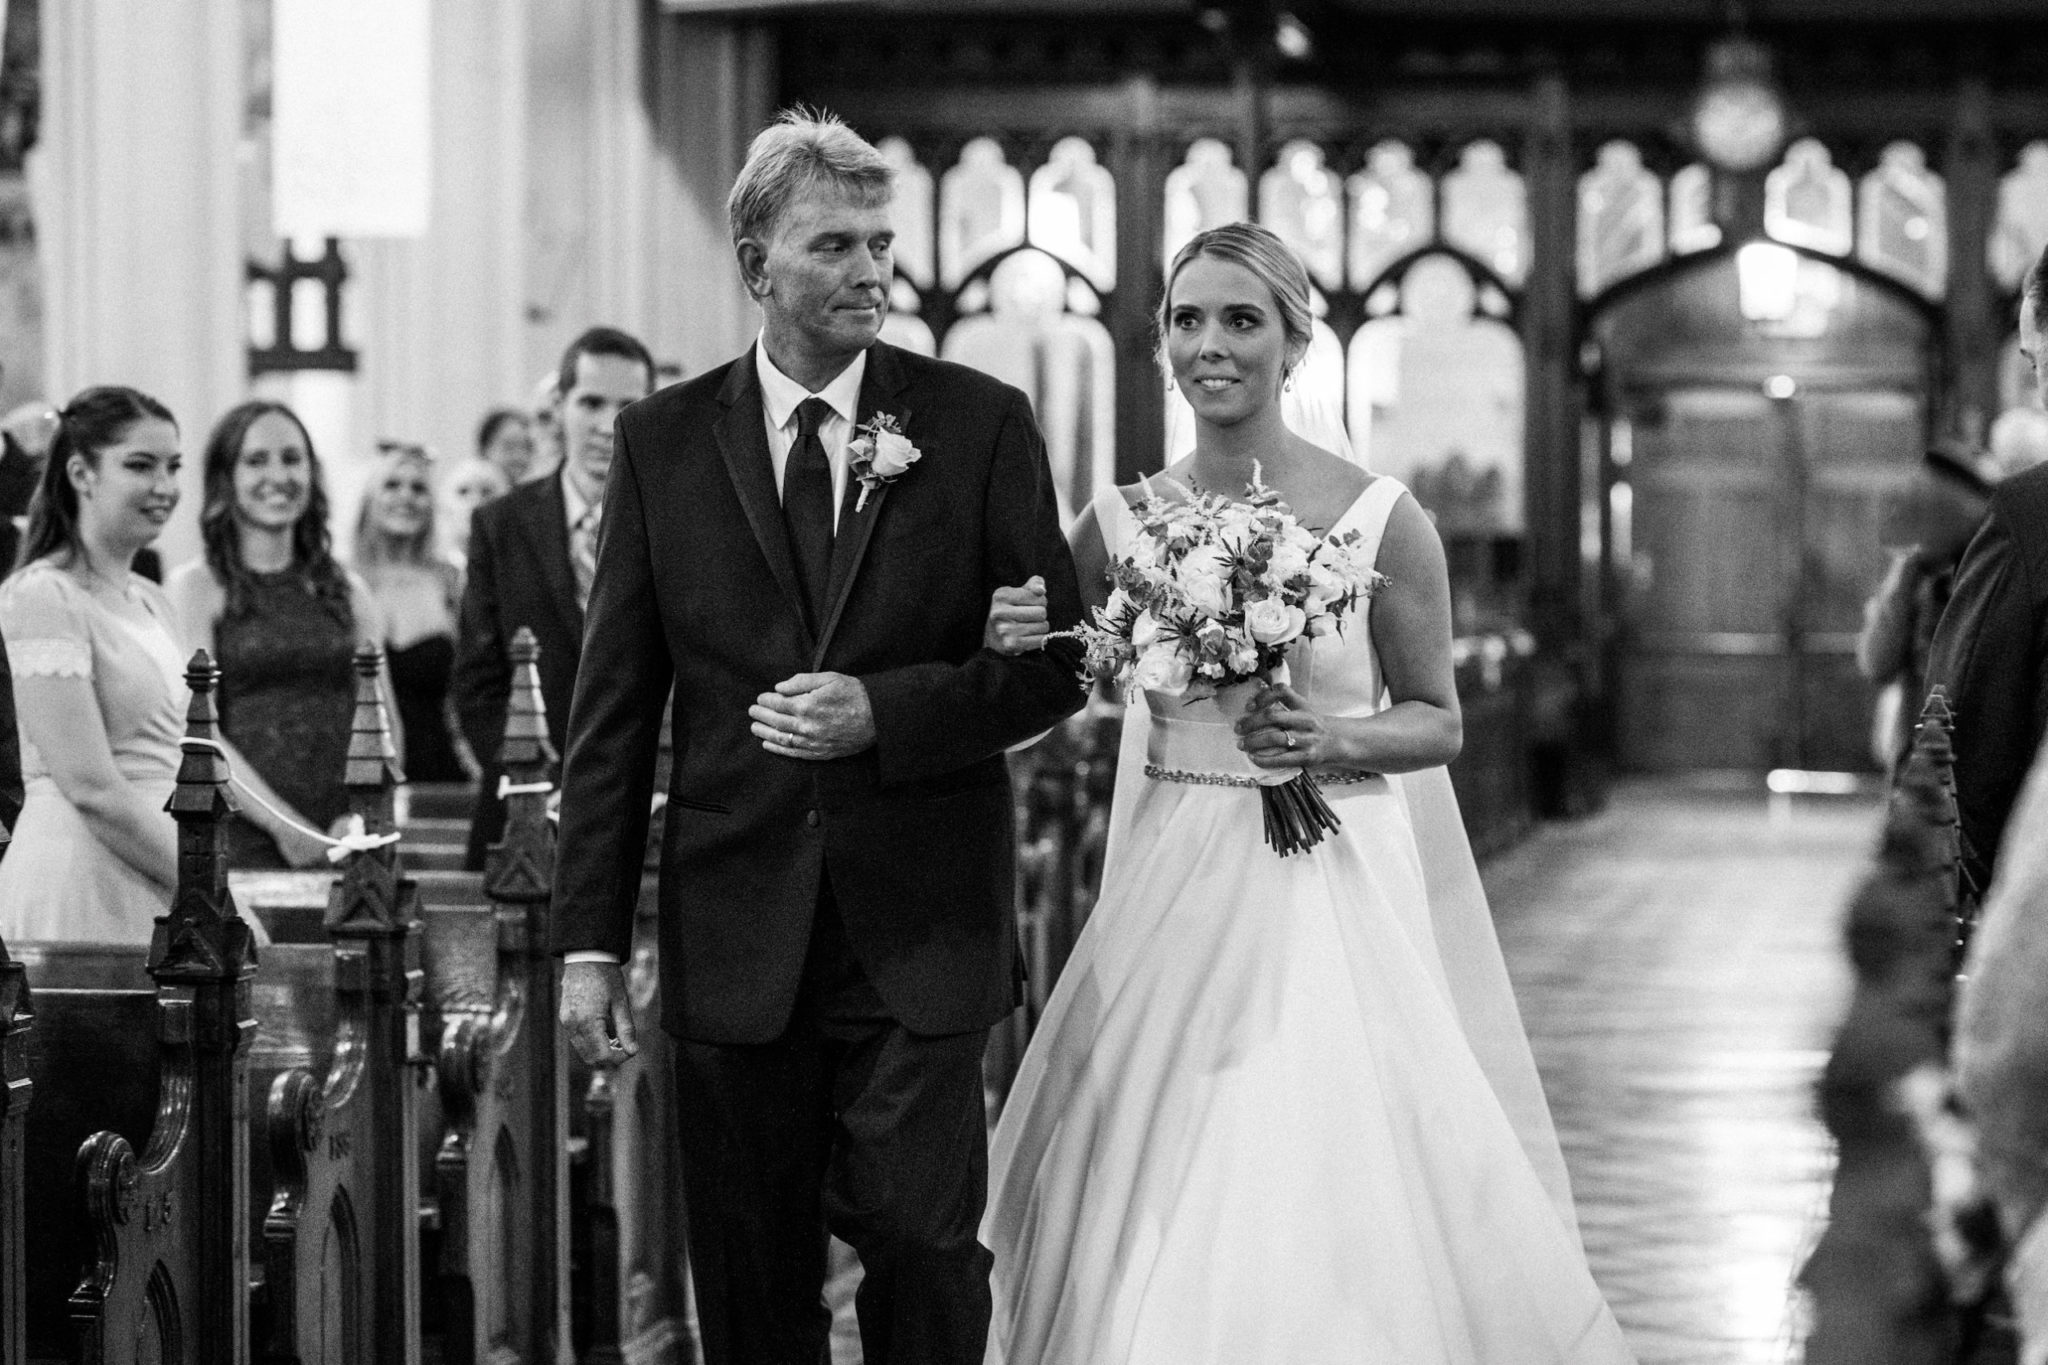 the bride and her father walking down the aisle of the basilica of sainte anne de detroit at the start of the wedding ceremony processional,downtown detroit wedding day